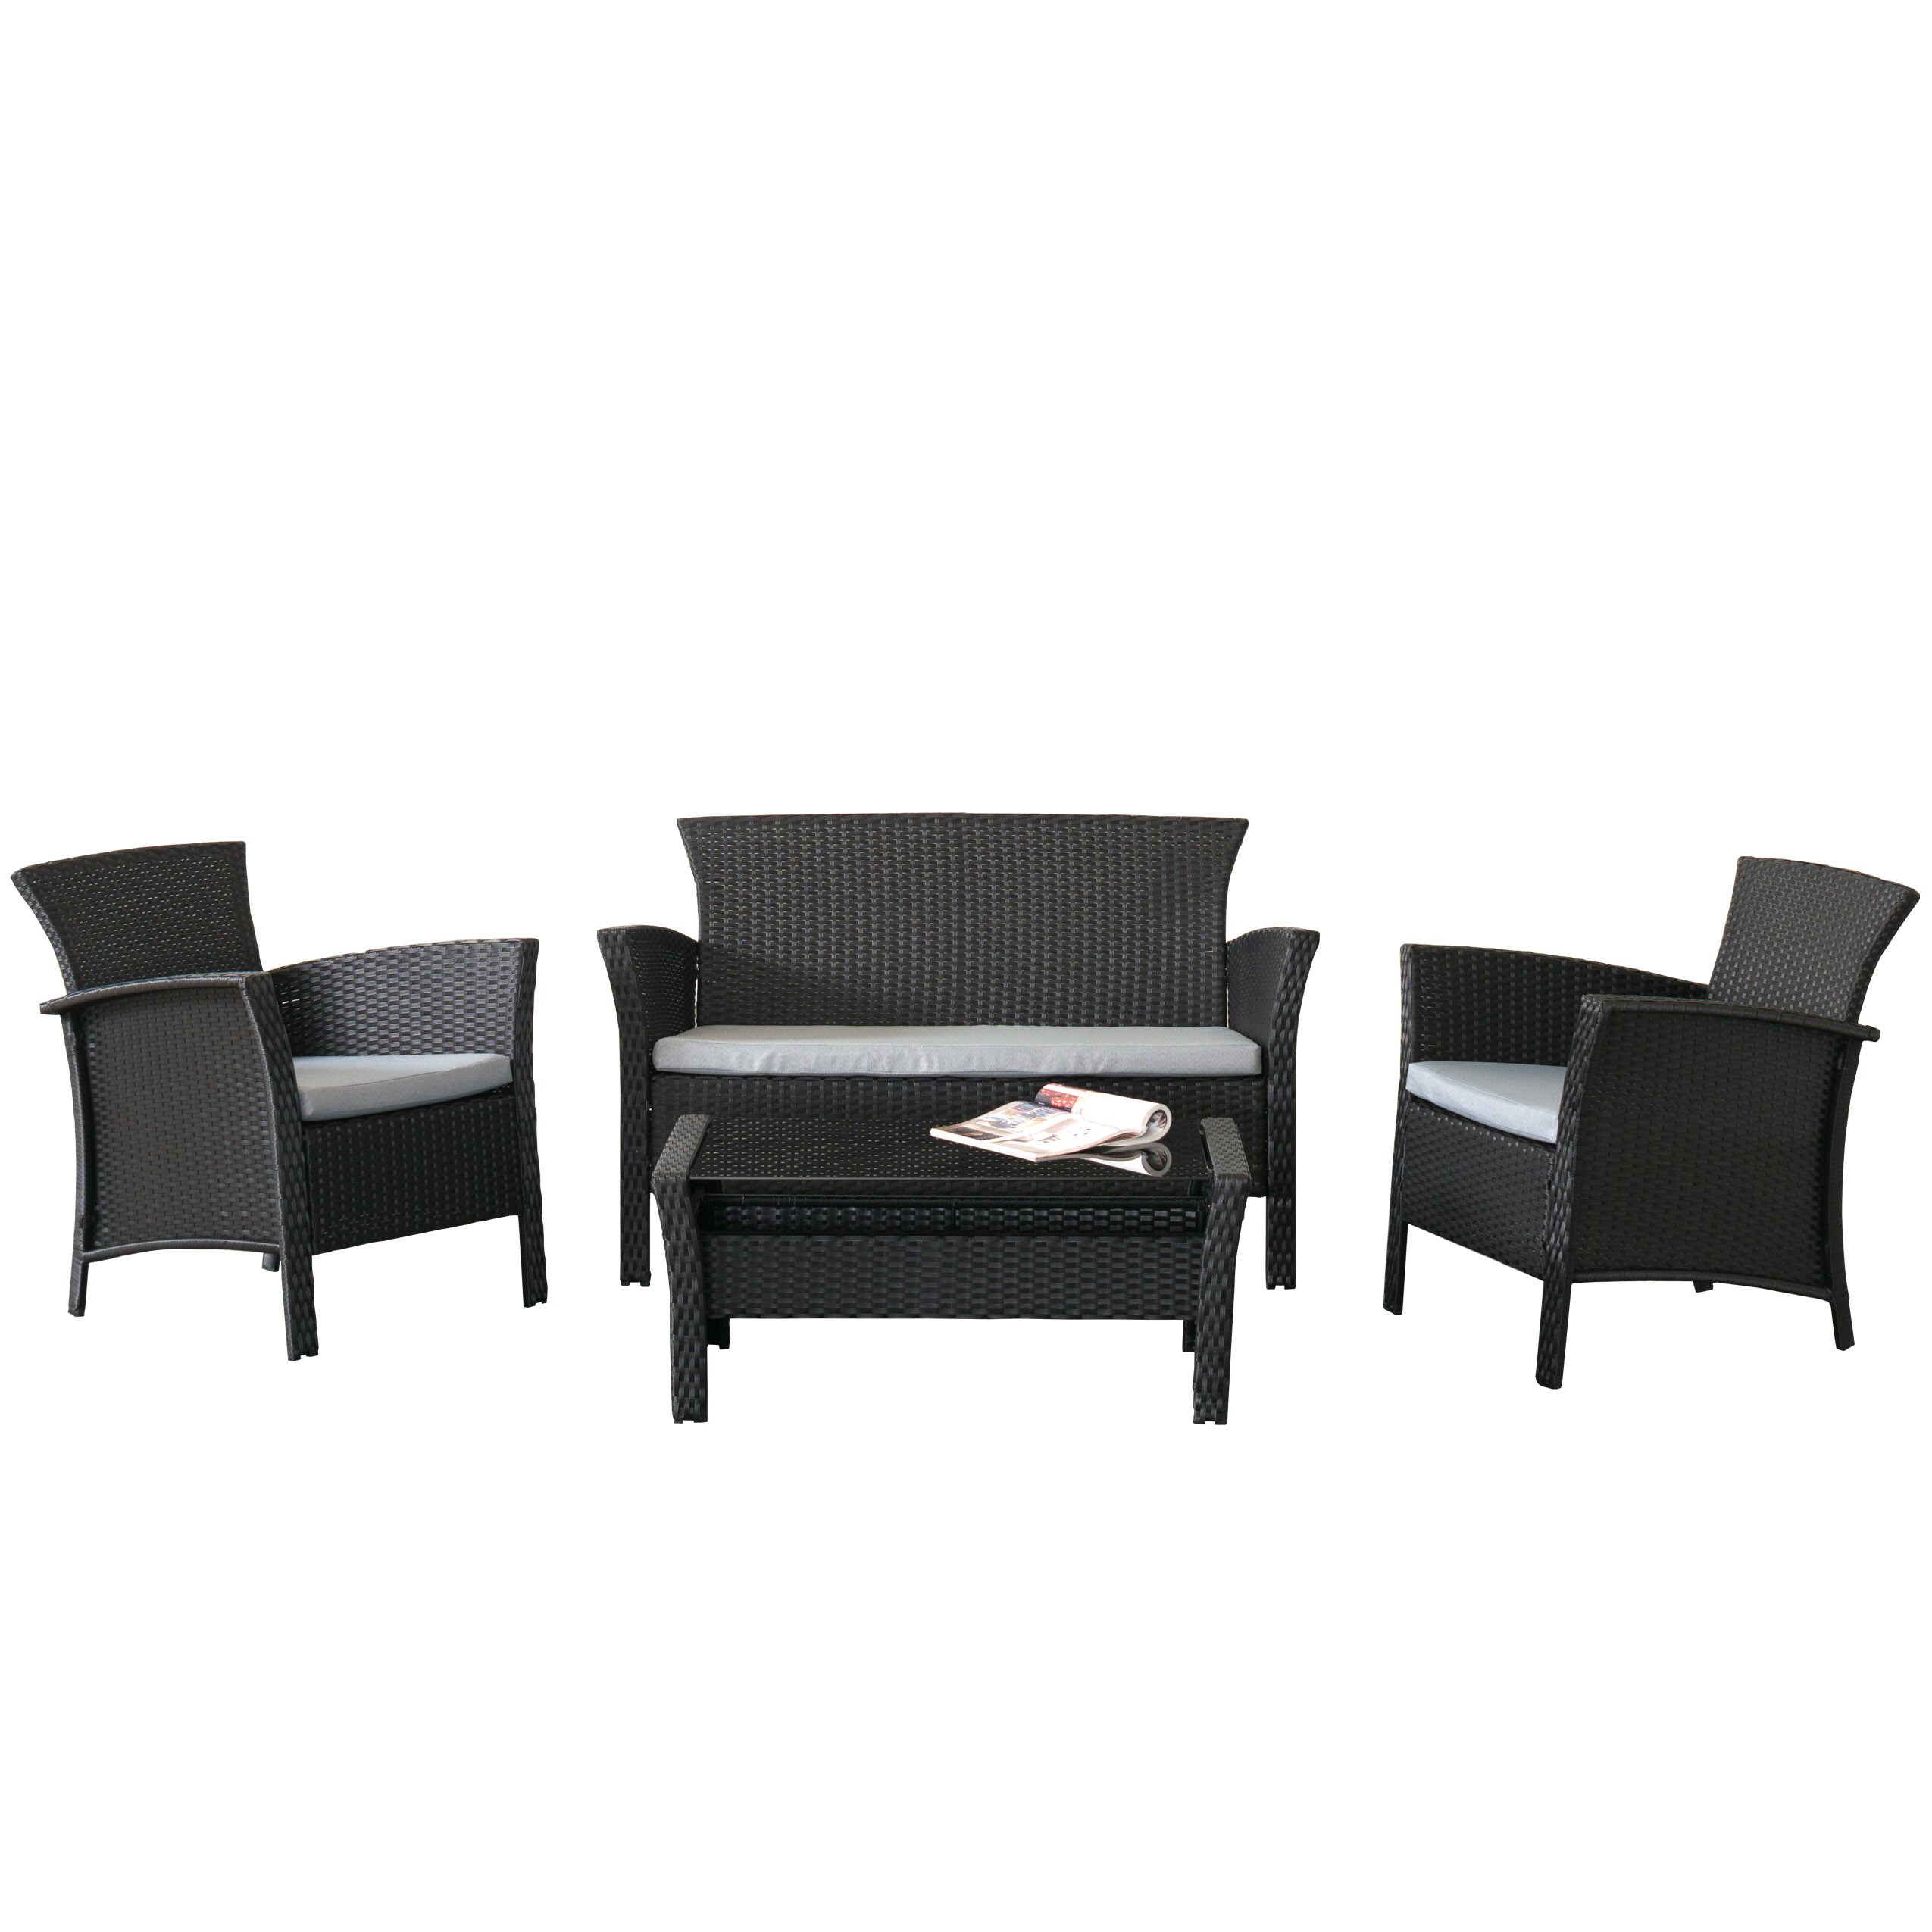 Rattan Garden Furniture Set 4 Piece chairs sofa Table Outdoor Patio Conservatory 